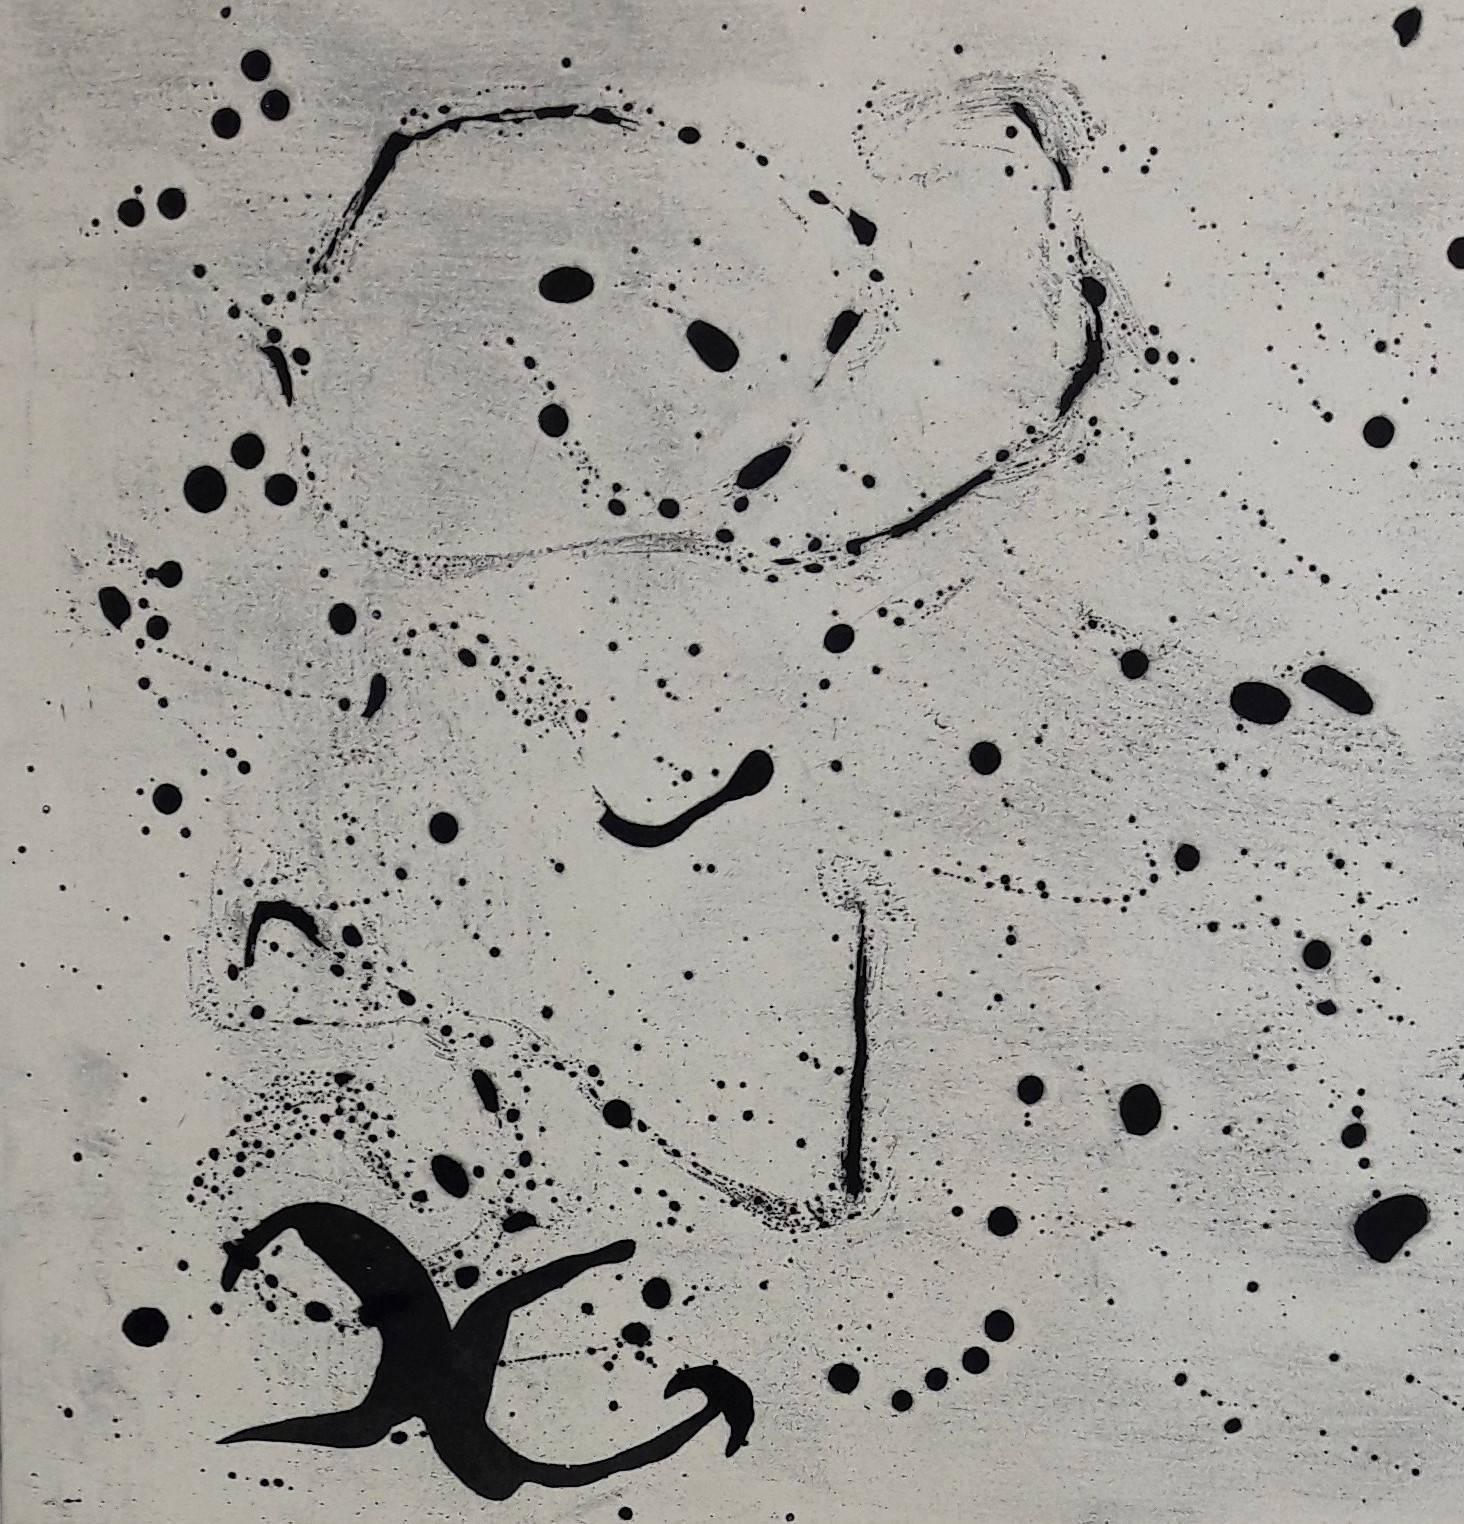 Fond Marin ( Seabed ) III - Original Etching Handsigned - 50 copies - Gray Abstract Print by Joan Miró